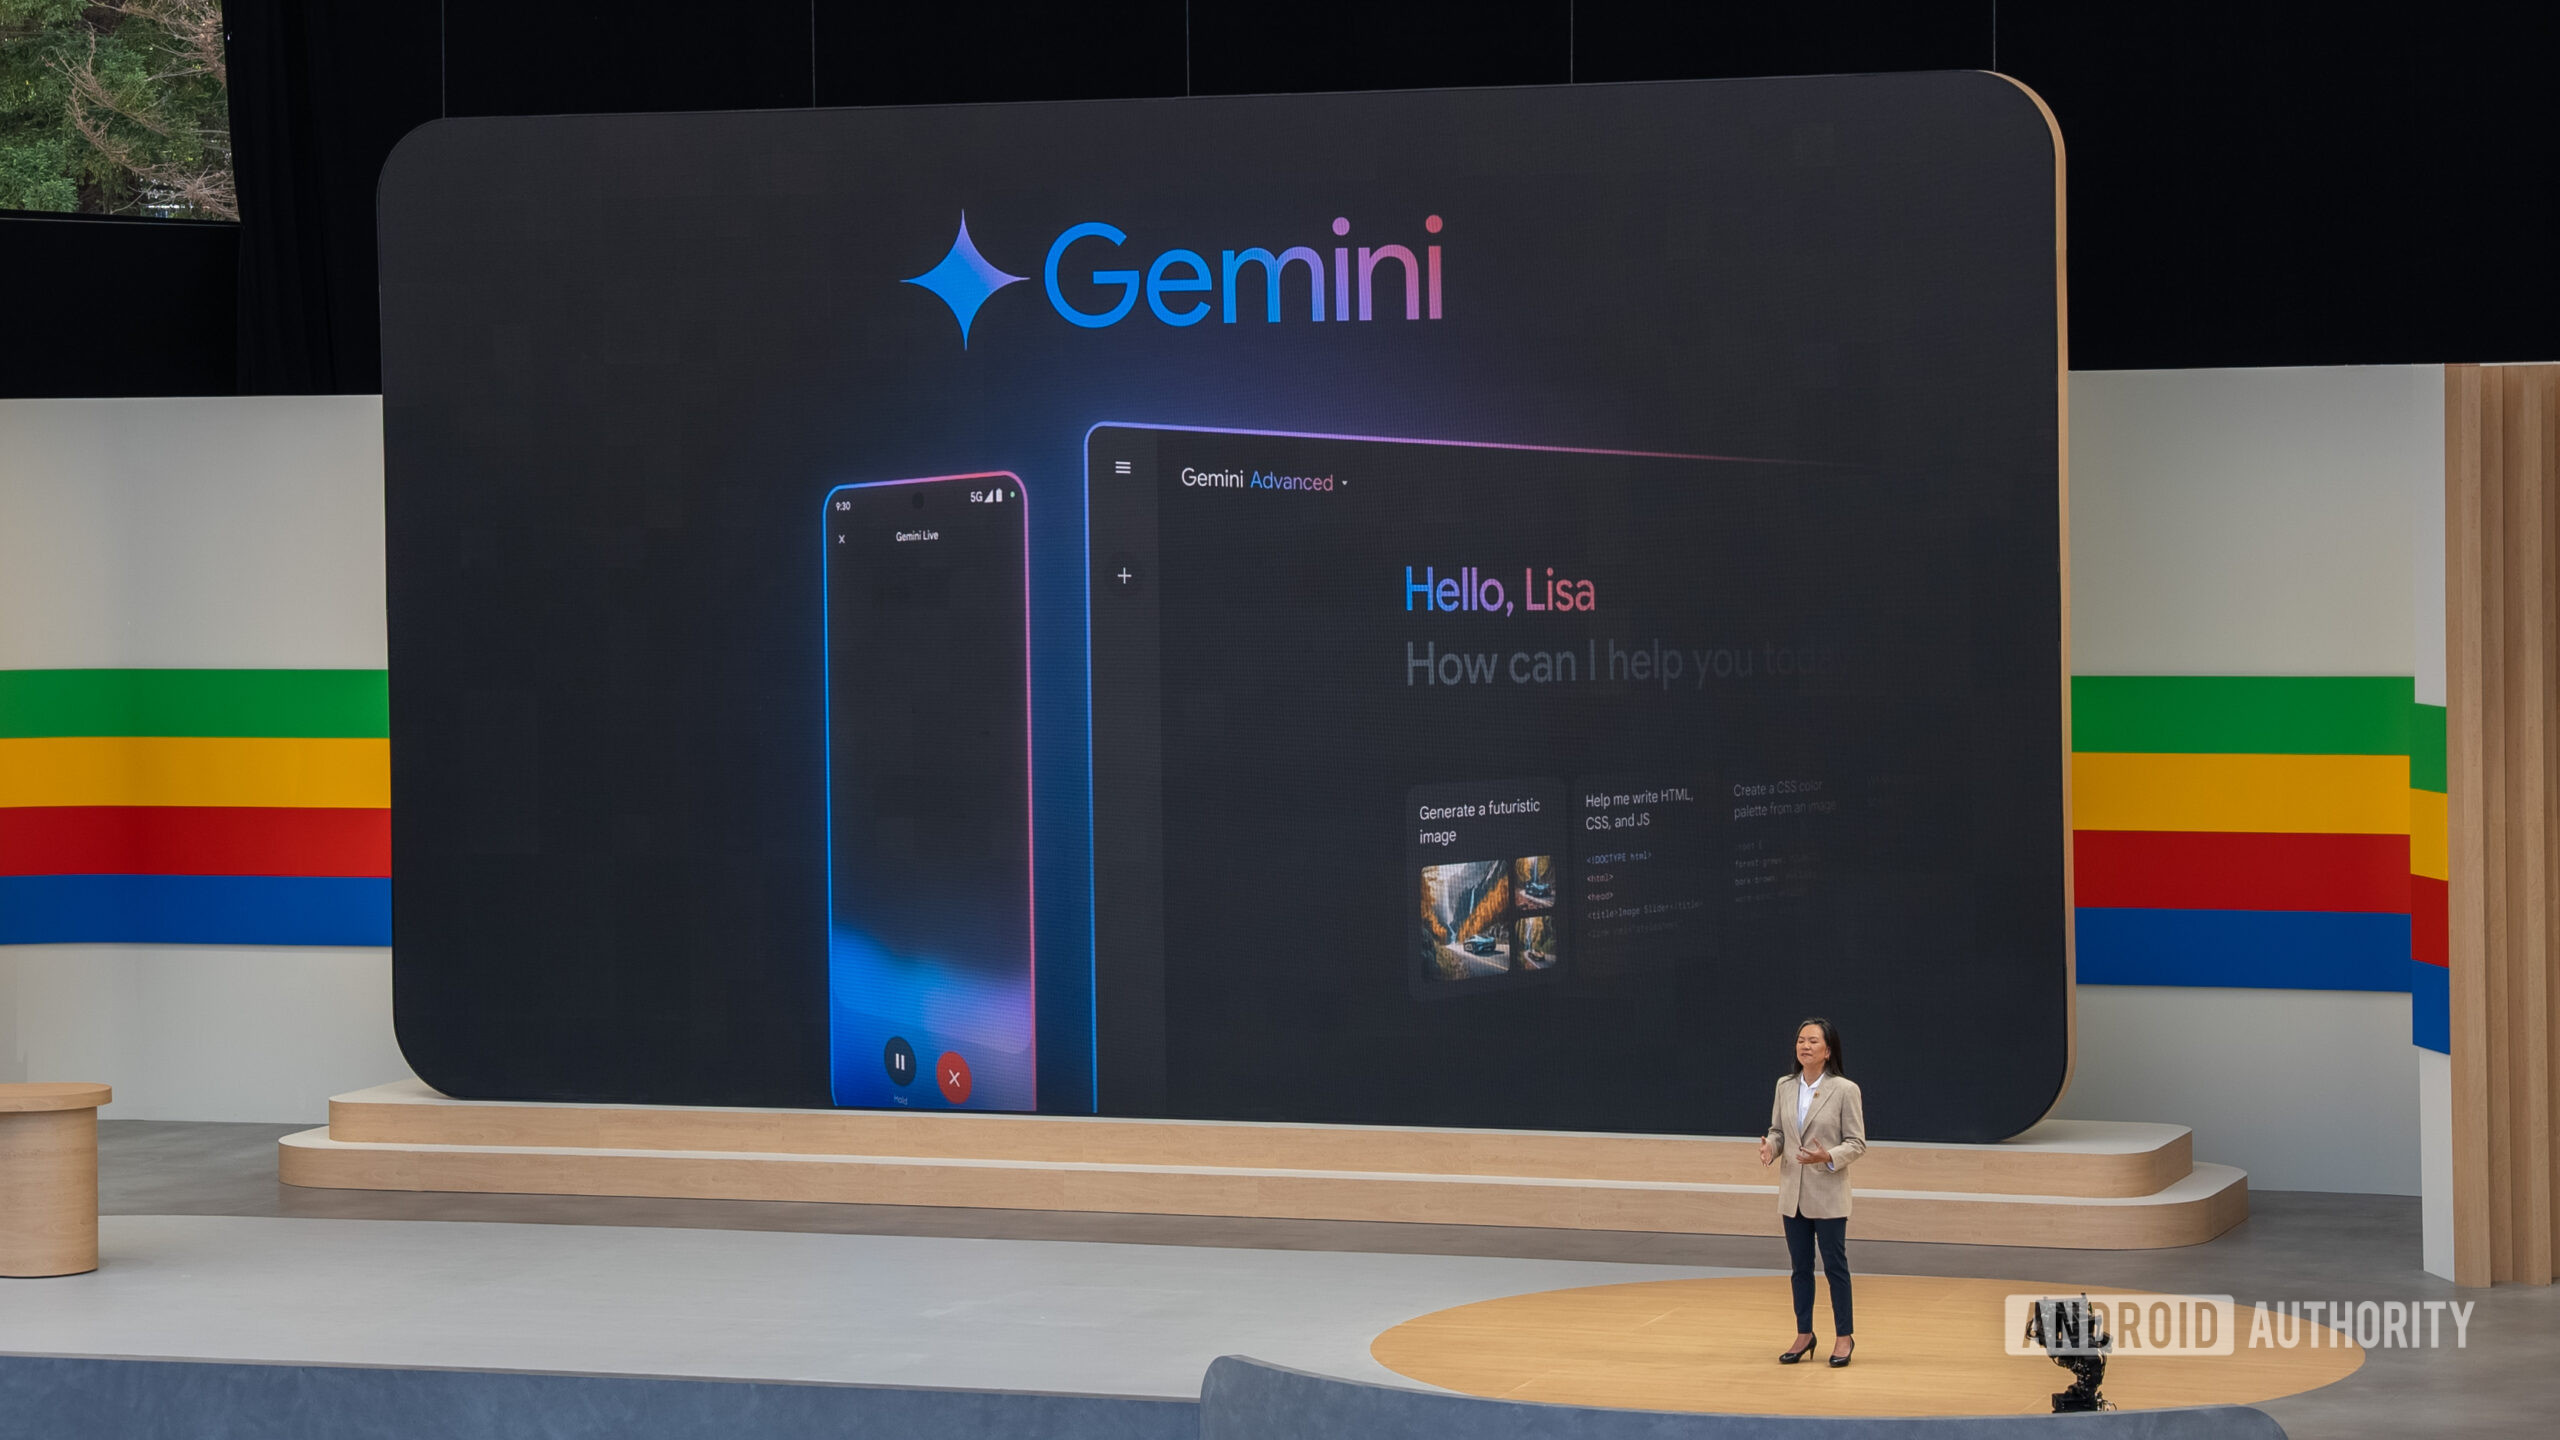 Google Gemini logo and app shown on two Android devices at Google I/O